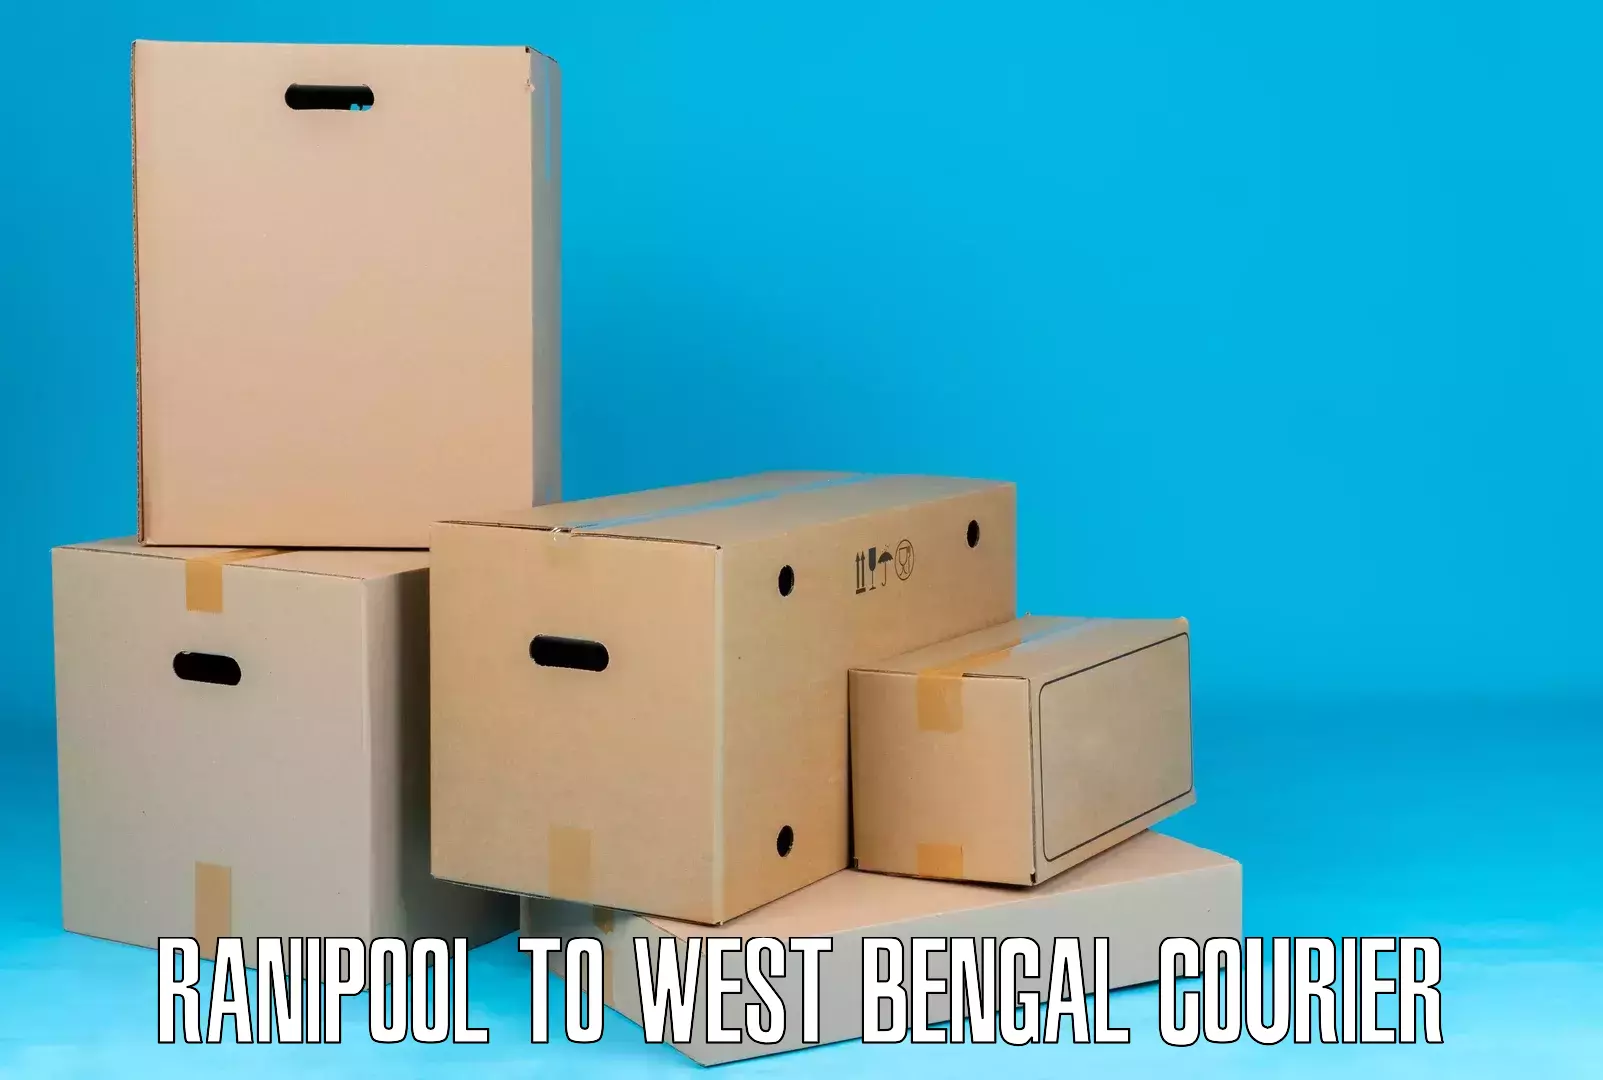 Lightweight parcel options Ranipool to West Bengal